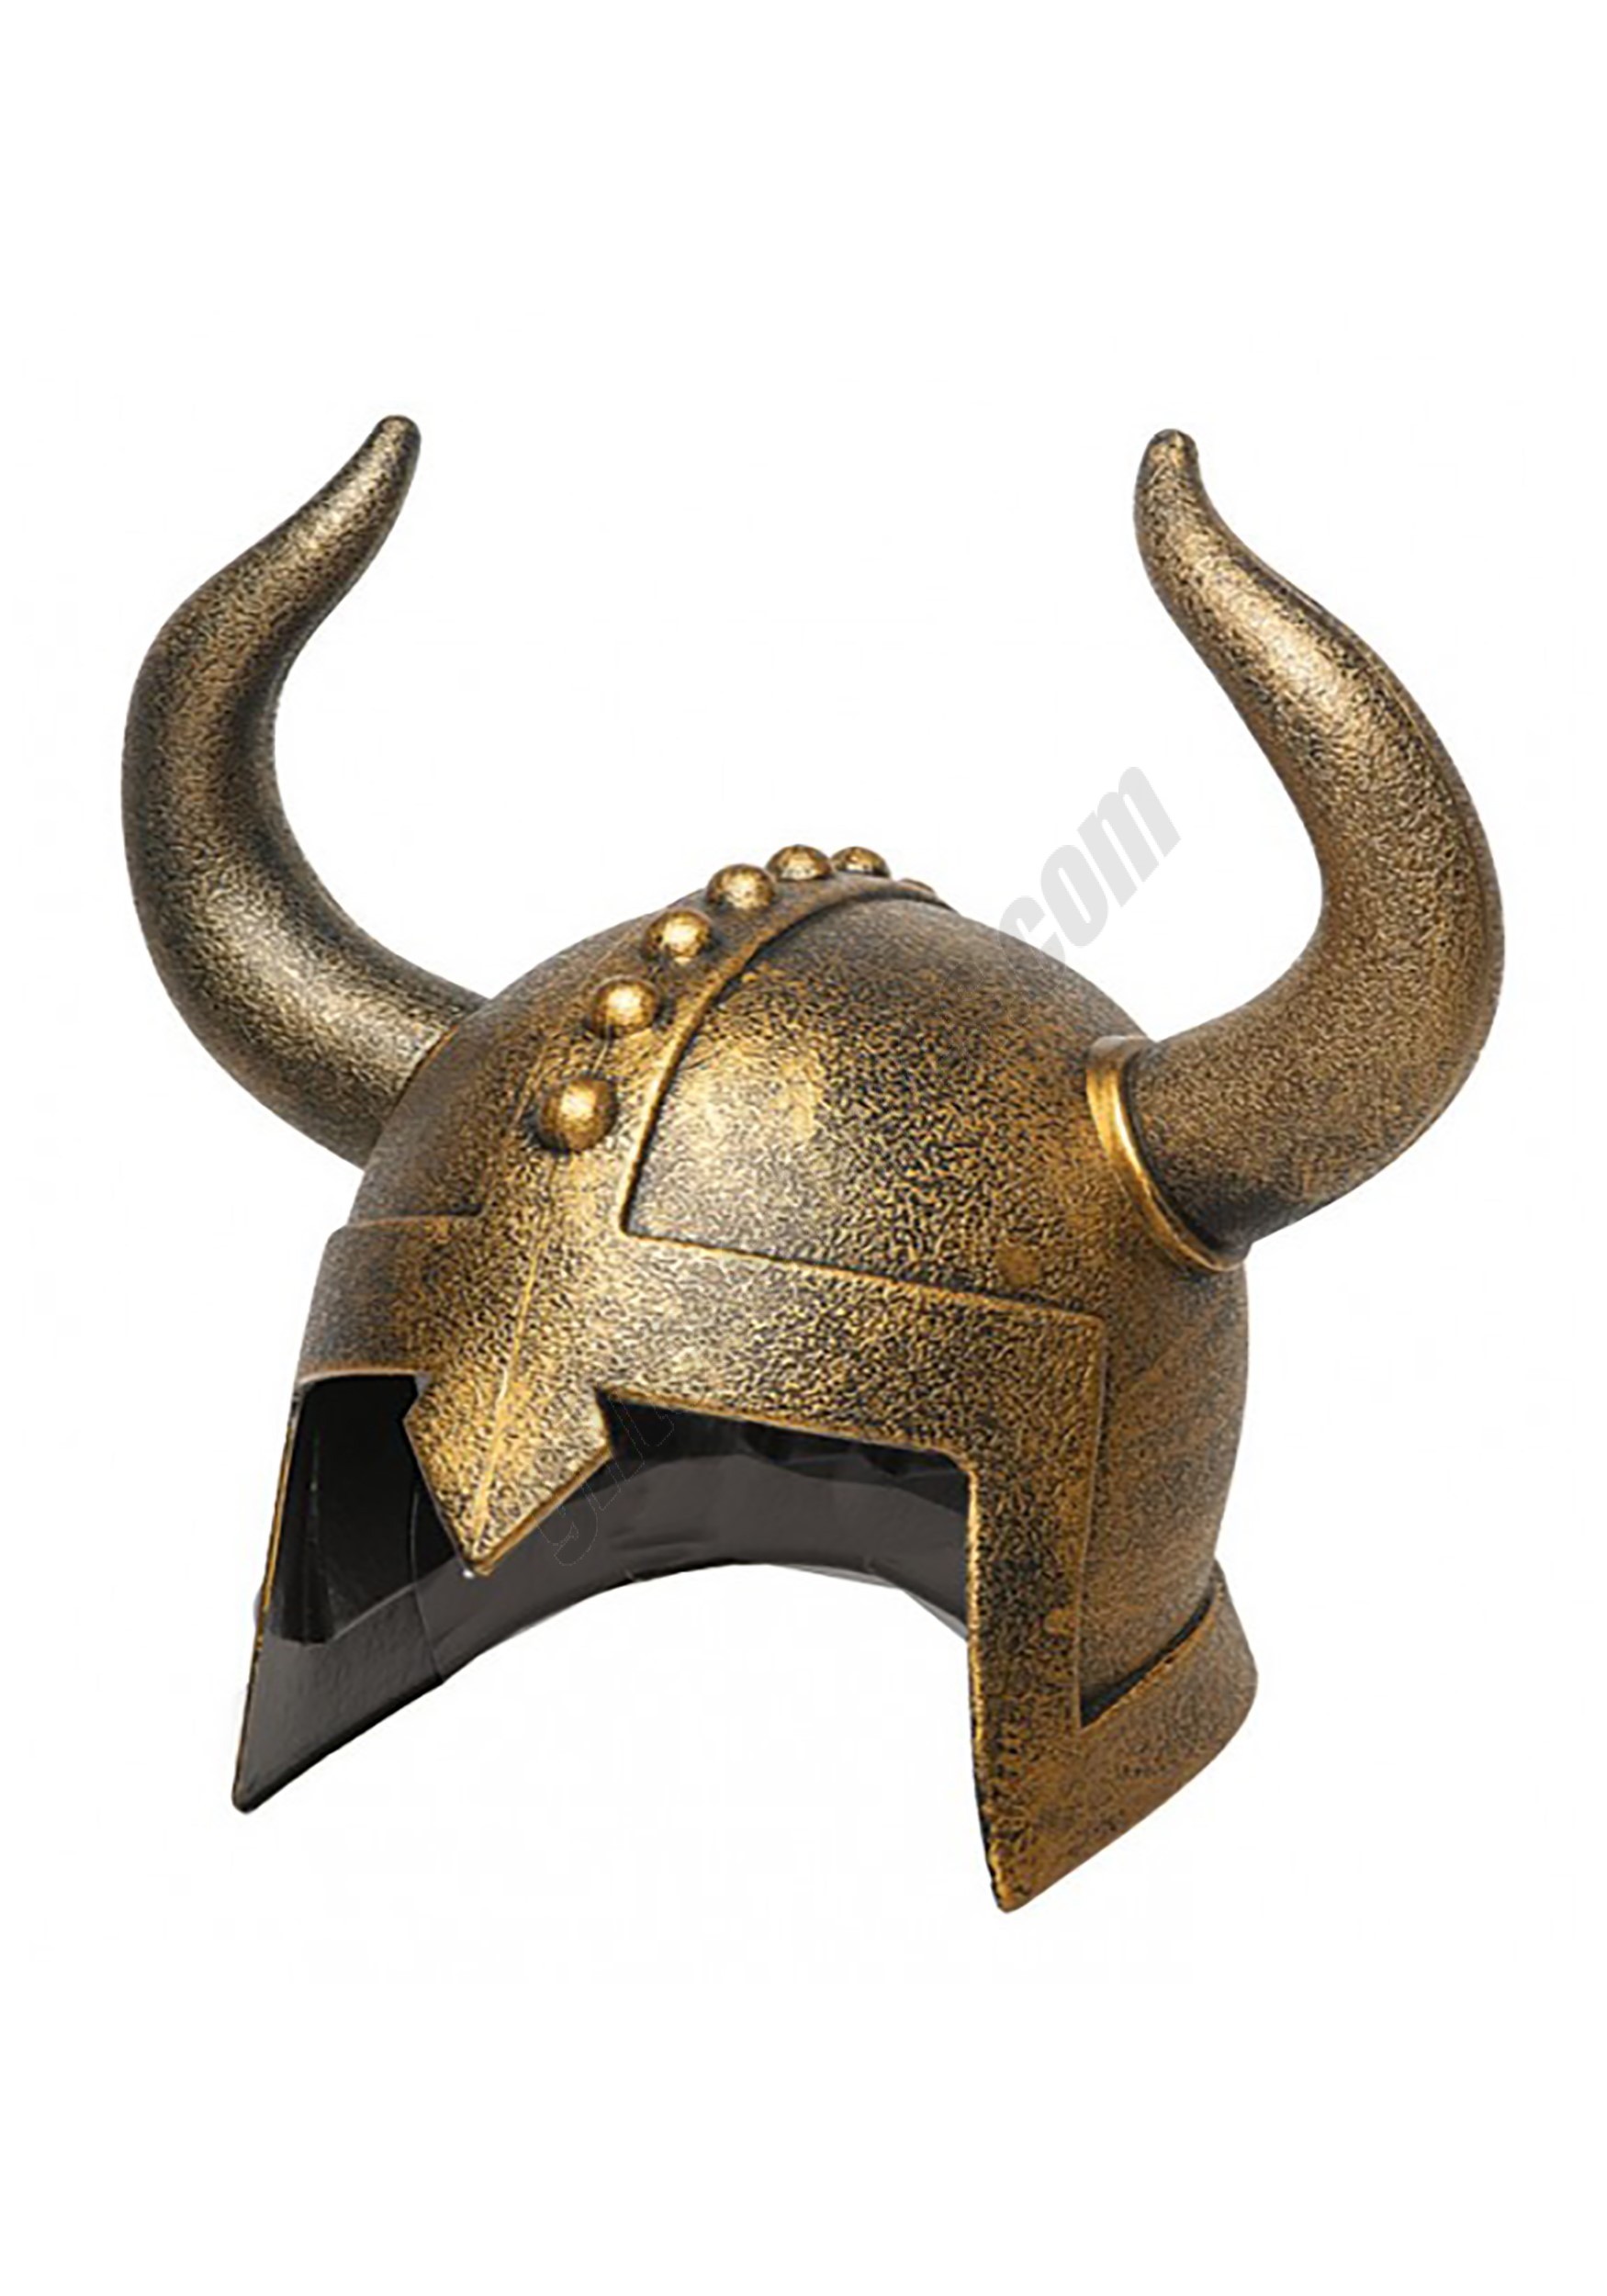 Bronze Horned Helmet for Adults Promotions - Bronze Horned Helmet for Adults Promotions